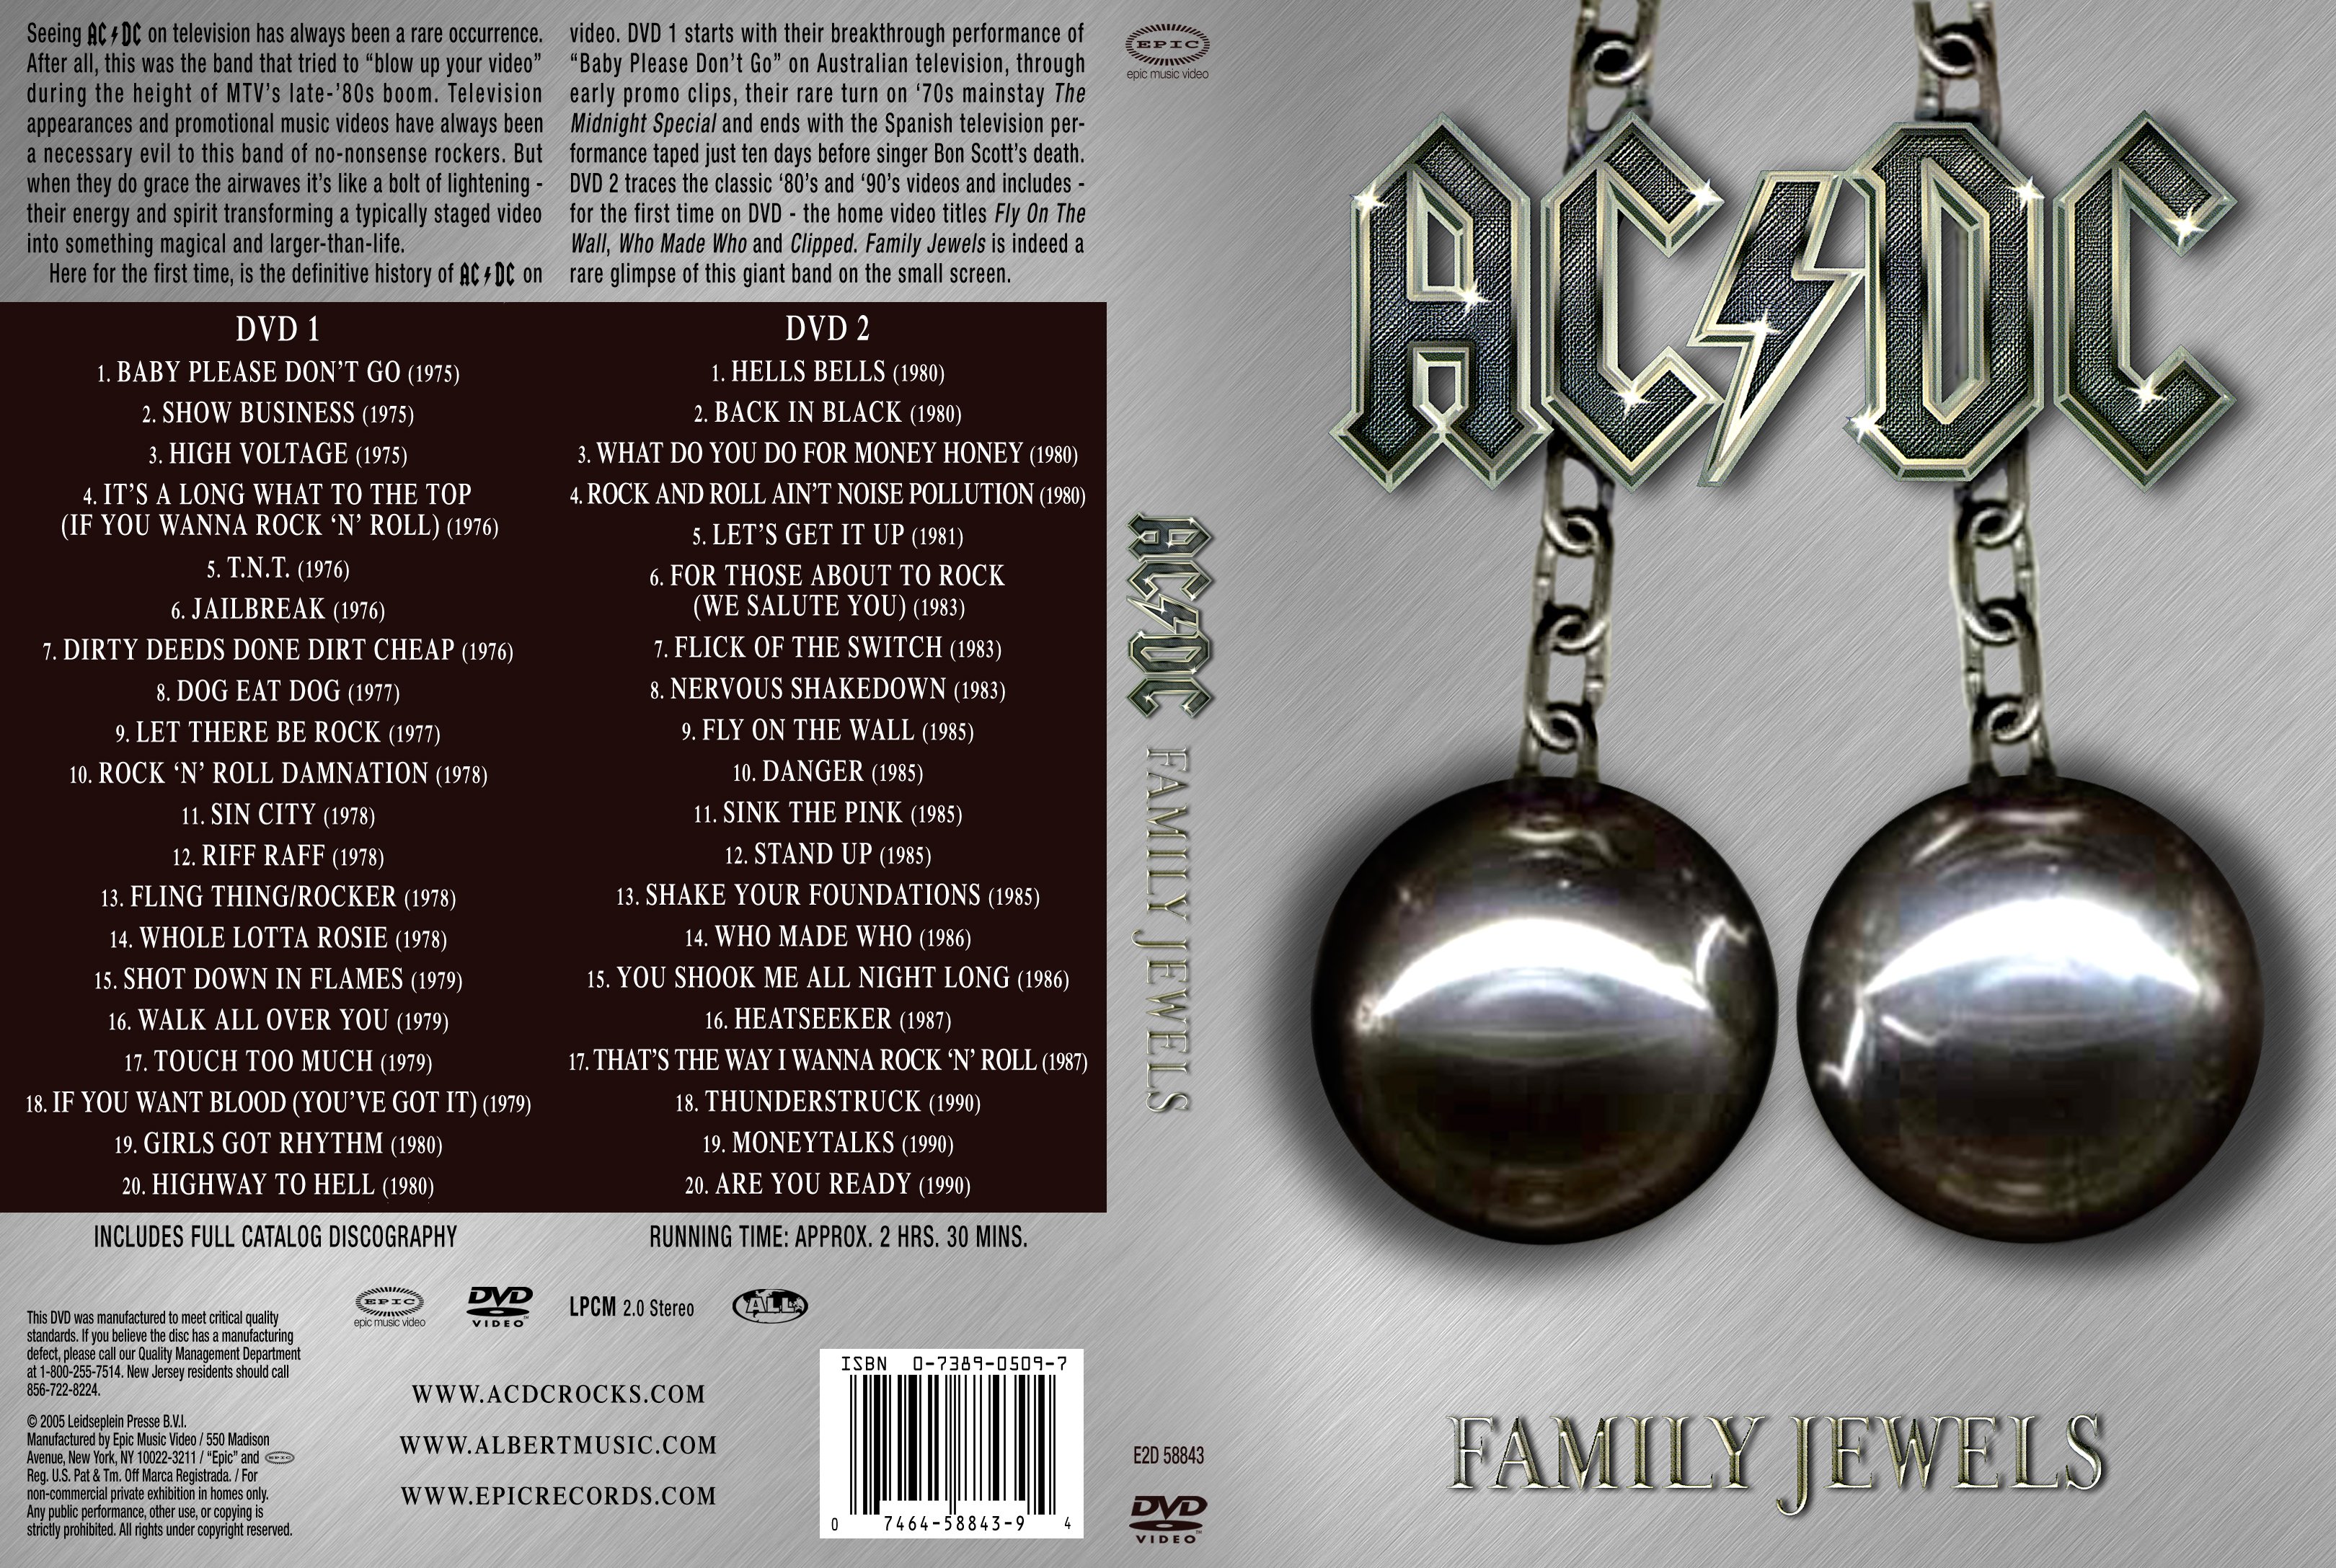 Jaquette DVD ACDC family jewels